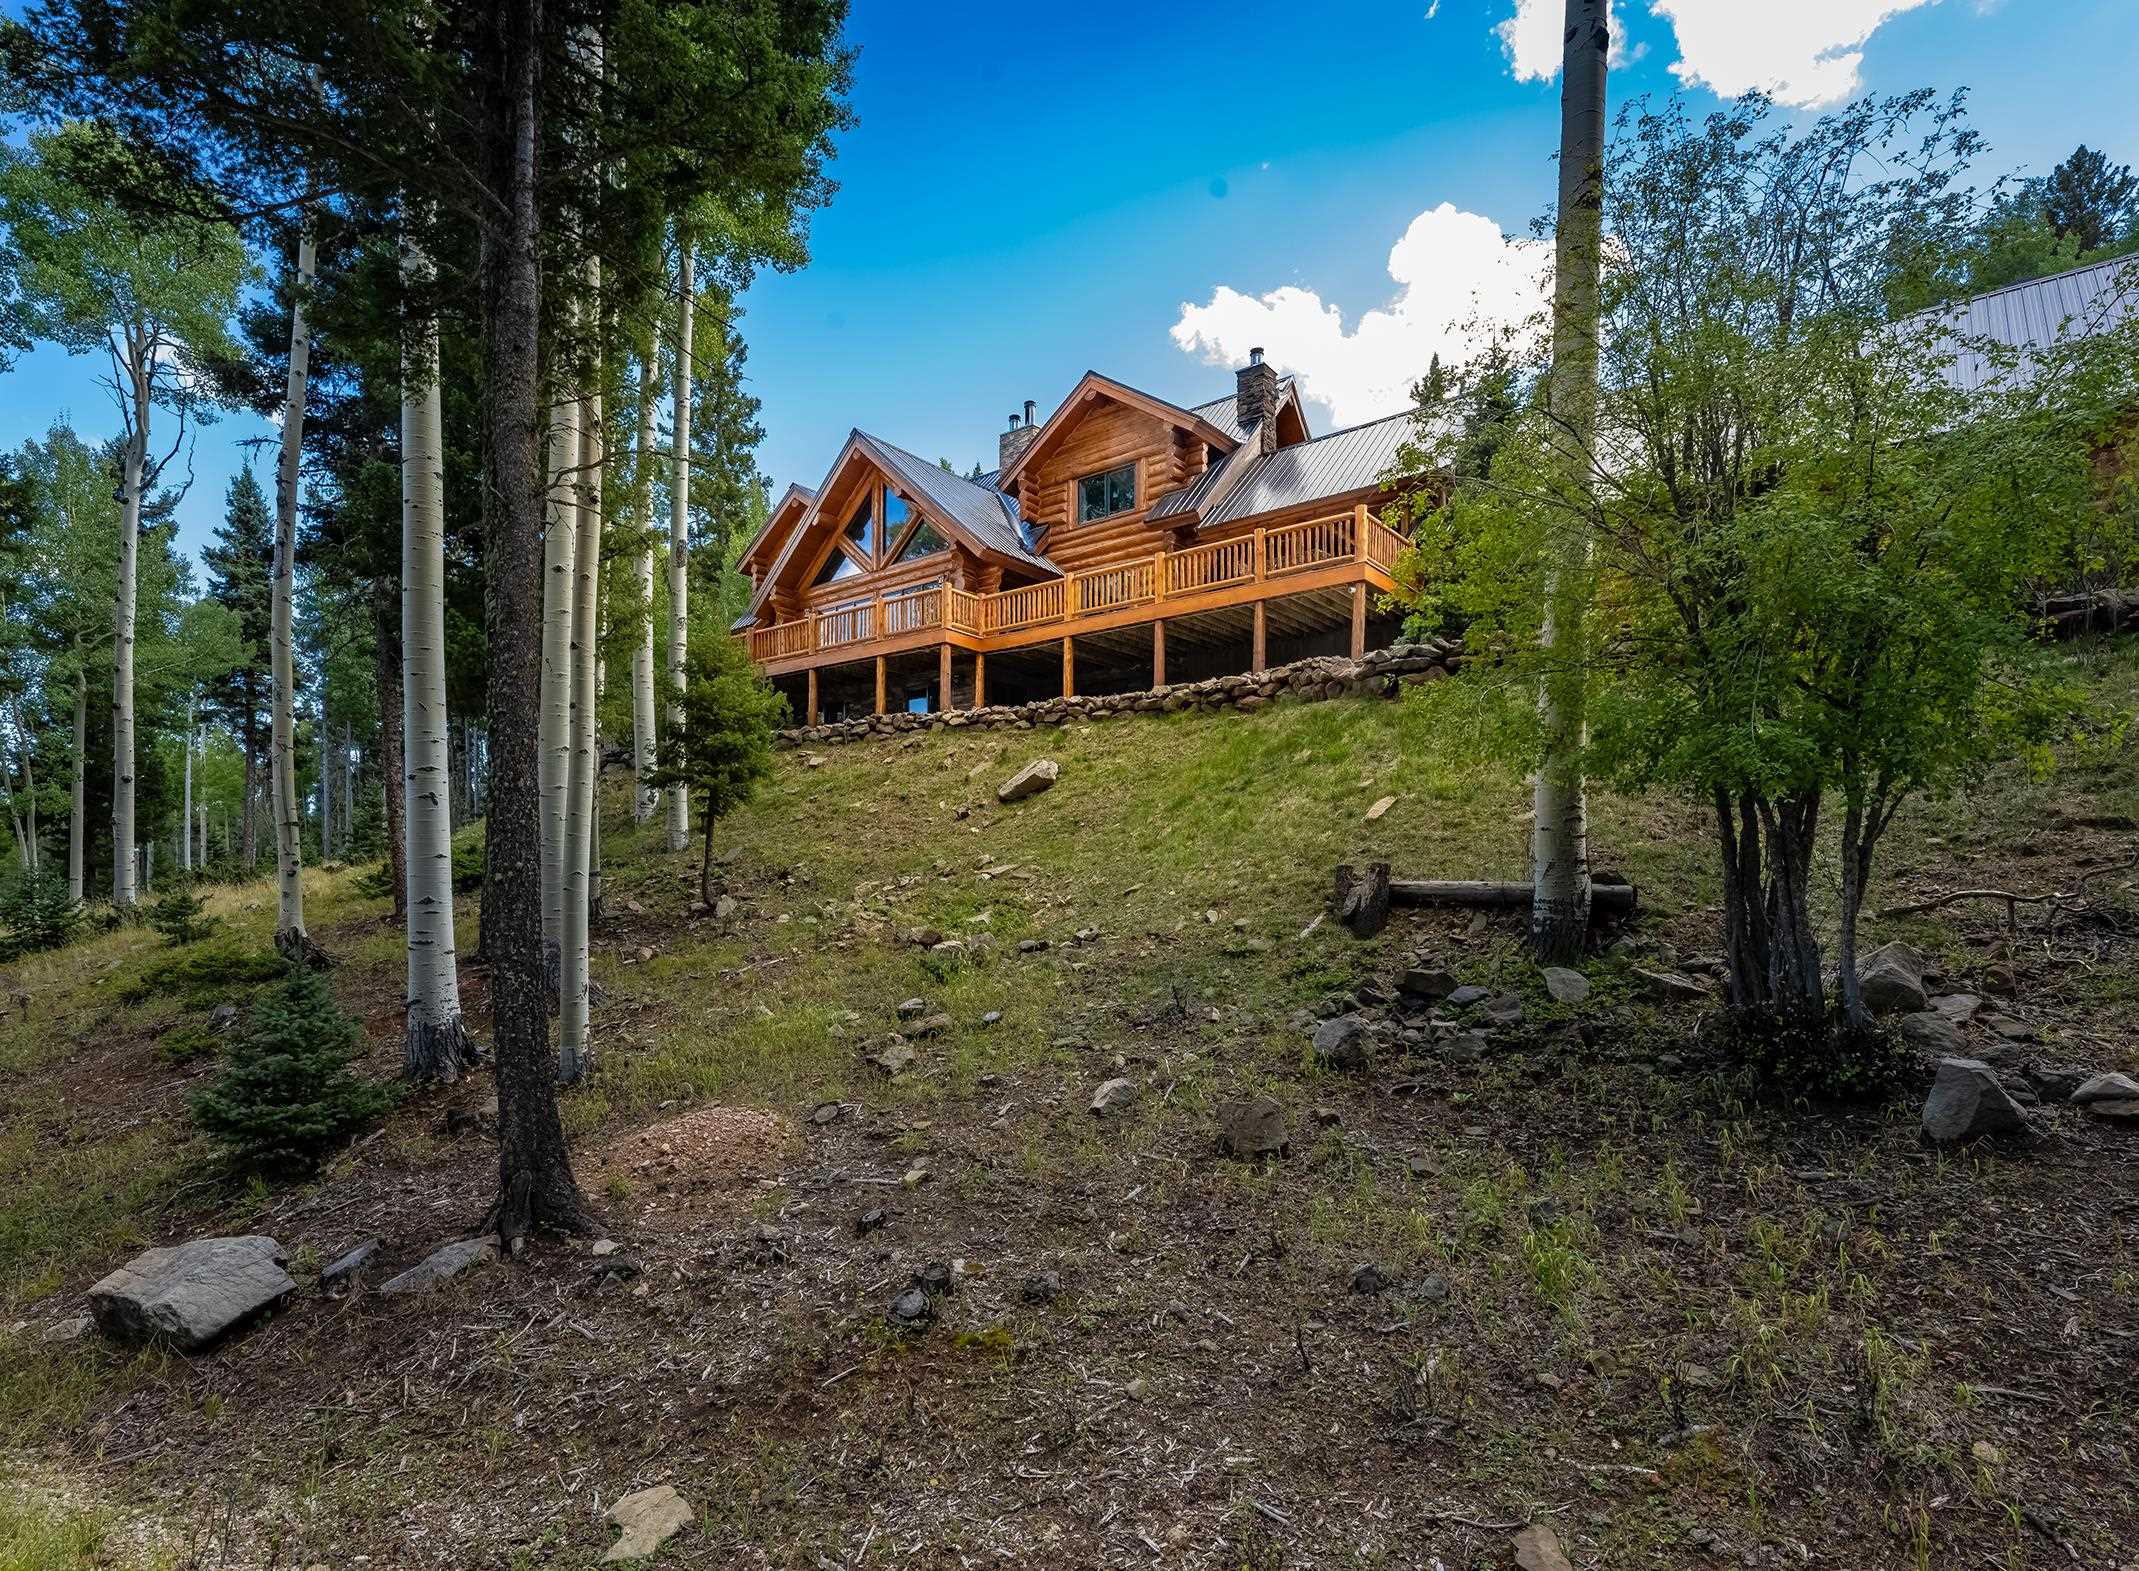 Dreaming of escaping to a luxurious retreat nestled high up in the mountain aspens? Look no further! This three-story luxury mountain log home offers the perfect combination of stunning natural surroundings, modern amenities, plus privacy and seclusion. Multiple living areas and master suites on each level make it convenient for multi-family gatherings. There are top-of-the-line appliances, soaring ceilings, grand fireplaces, and large windows that allow streams of natural light to flood the space. An expansive outdoor deck with a stone fireplace and dining area is perfect for enjoying breathtaking sunsets or hosting memorable moments. Enjoy viewing the wildlife while soaking in the relaxing hot-tub. Access to Carson National Forest is just a short distance away. New propanel seamless roof in 2021 is a plus for a new homebuyer. From sweeping panoramic views to  exclusive country club access to proximity to outdoor activities such as skiing, hiking, and fishing there is so much this dream property has to offer.